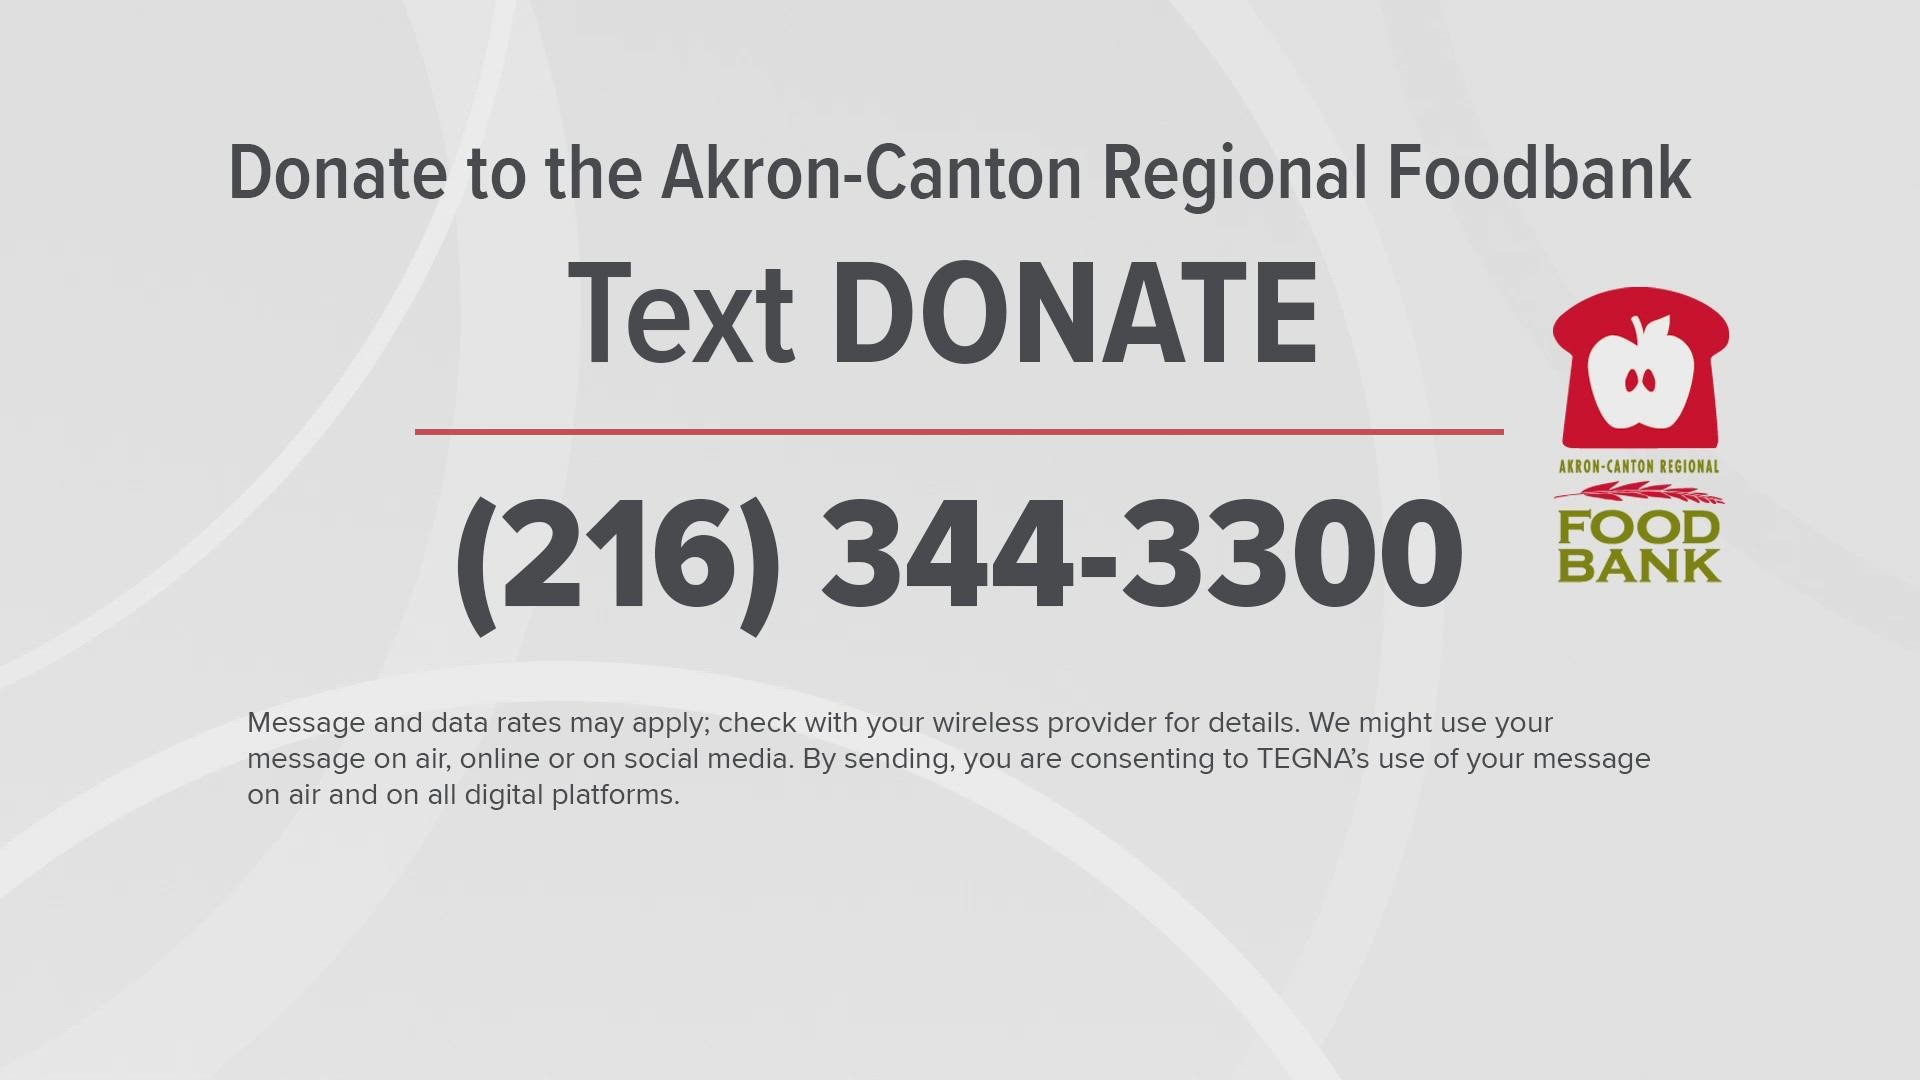 On Dec. 1, all of your donations for the Akron-Canton Regional Foodbank will be matched, dollar for dollar, up to $115,000.